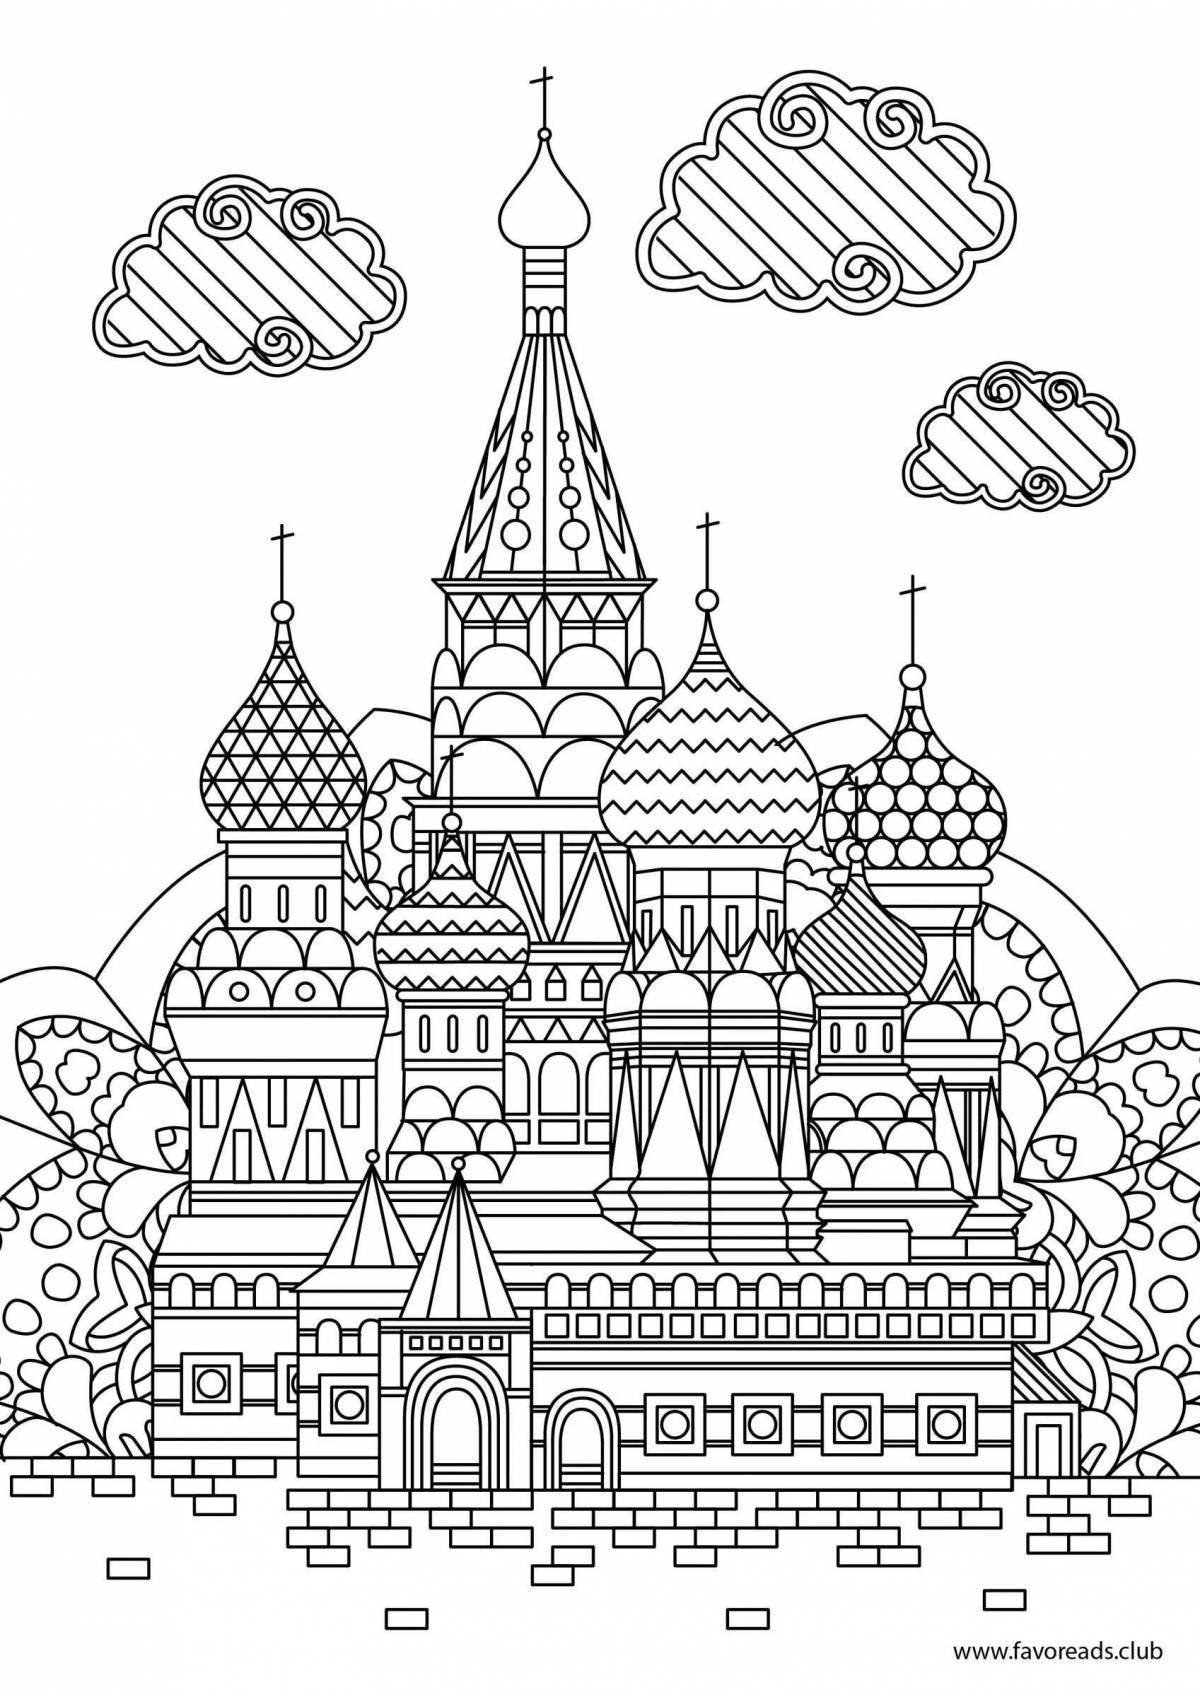 Coloring page shiny saint basil's cathedral